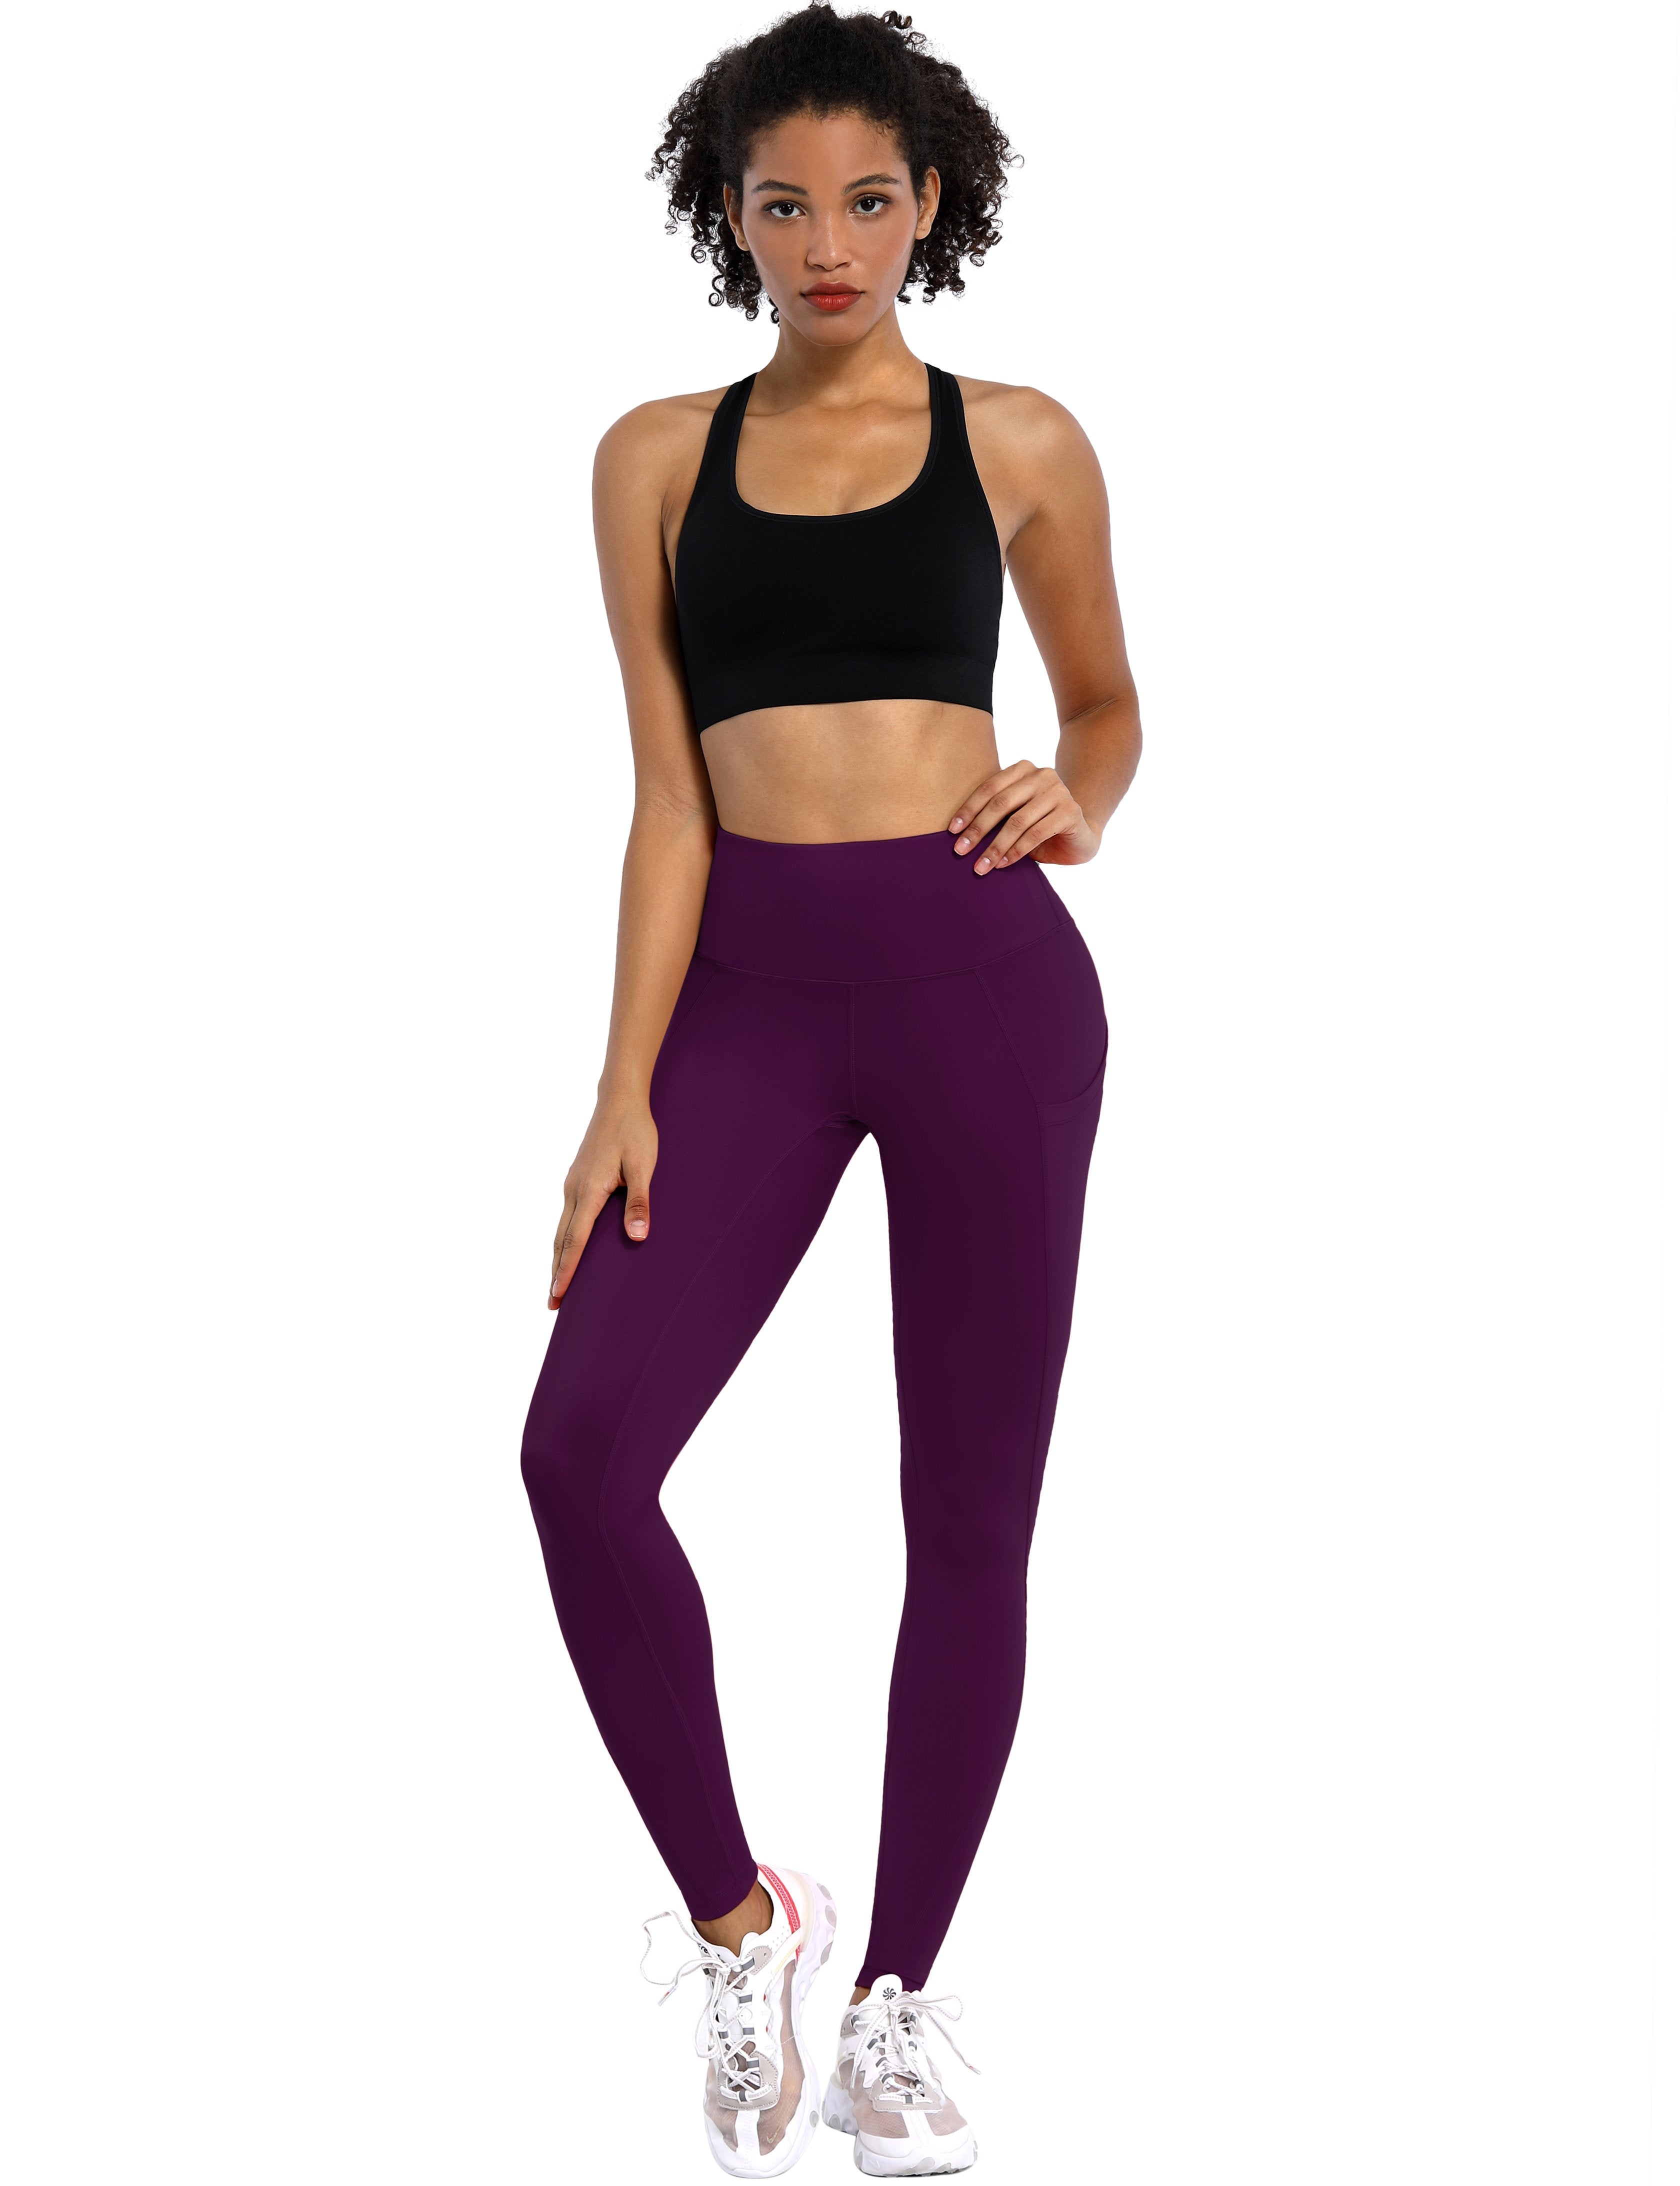 High Waist Side Pockets yogastudio Pants plum 75% Nylon, 25% Spandex Fabric doesn't attract lint easily 4-way stretch No see-through Moisture-wicking Tummy control Inner pocket